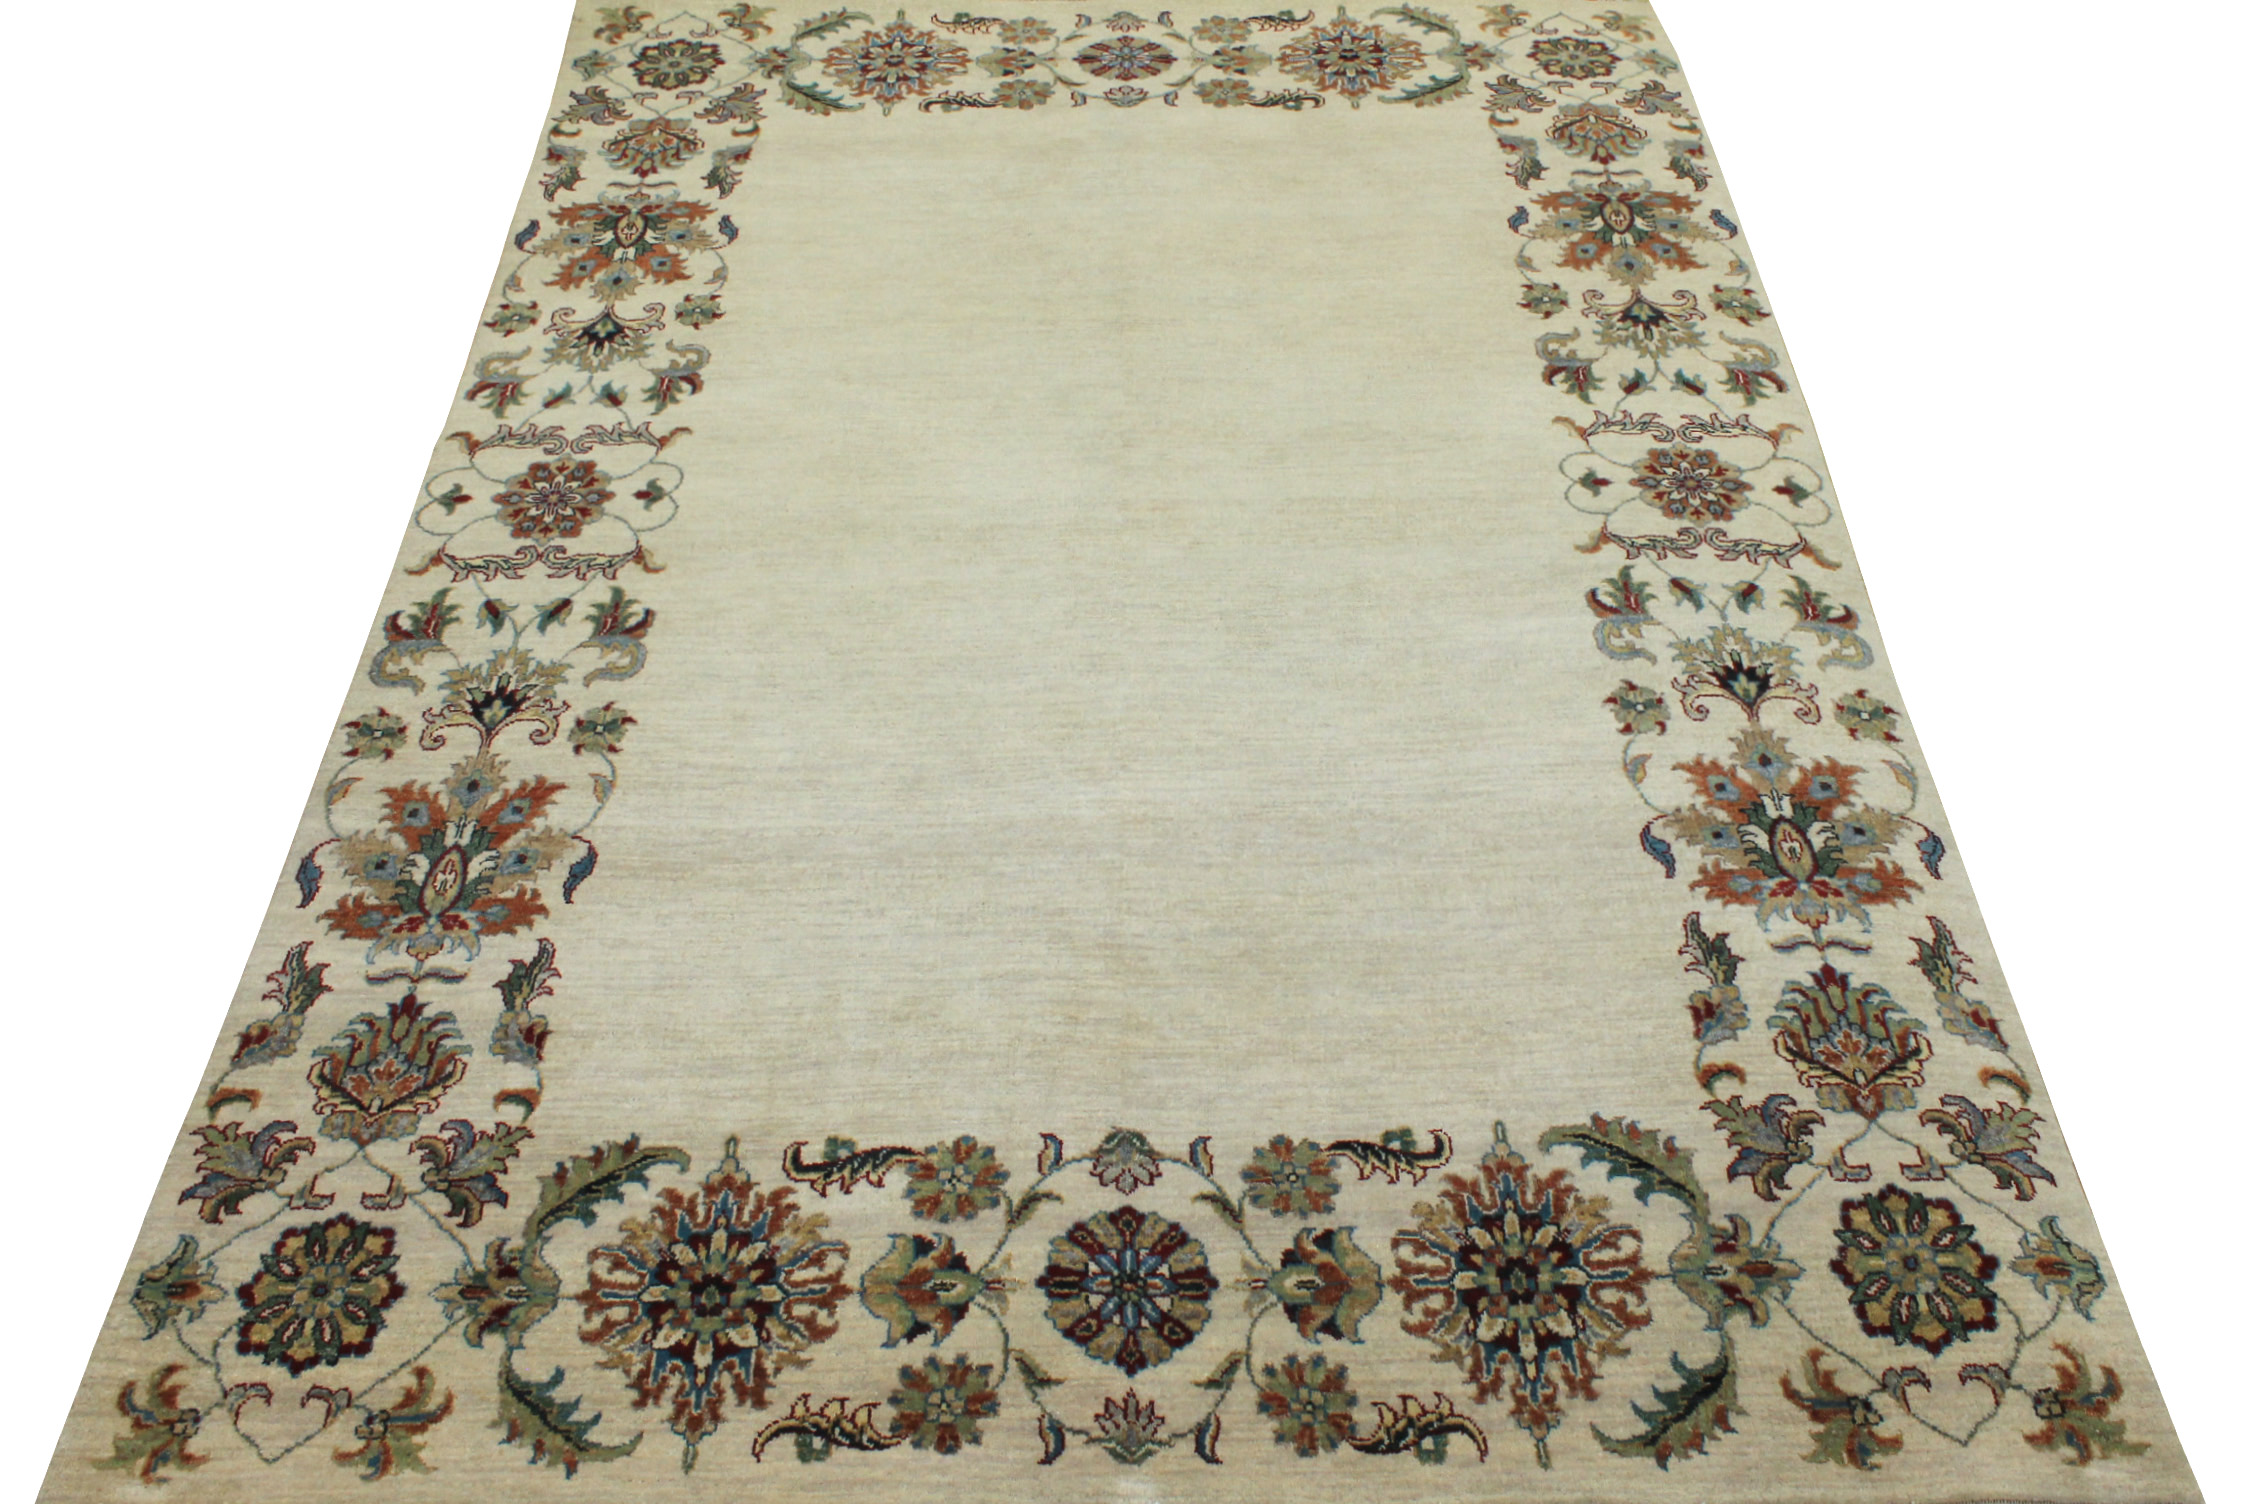 5x7/8 Traditional Hand Knotted Wool Area Rug - MR16580